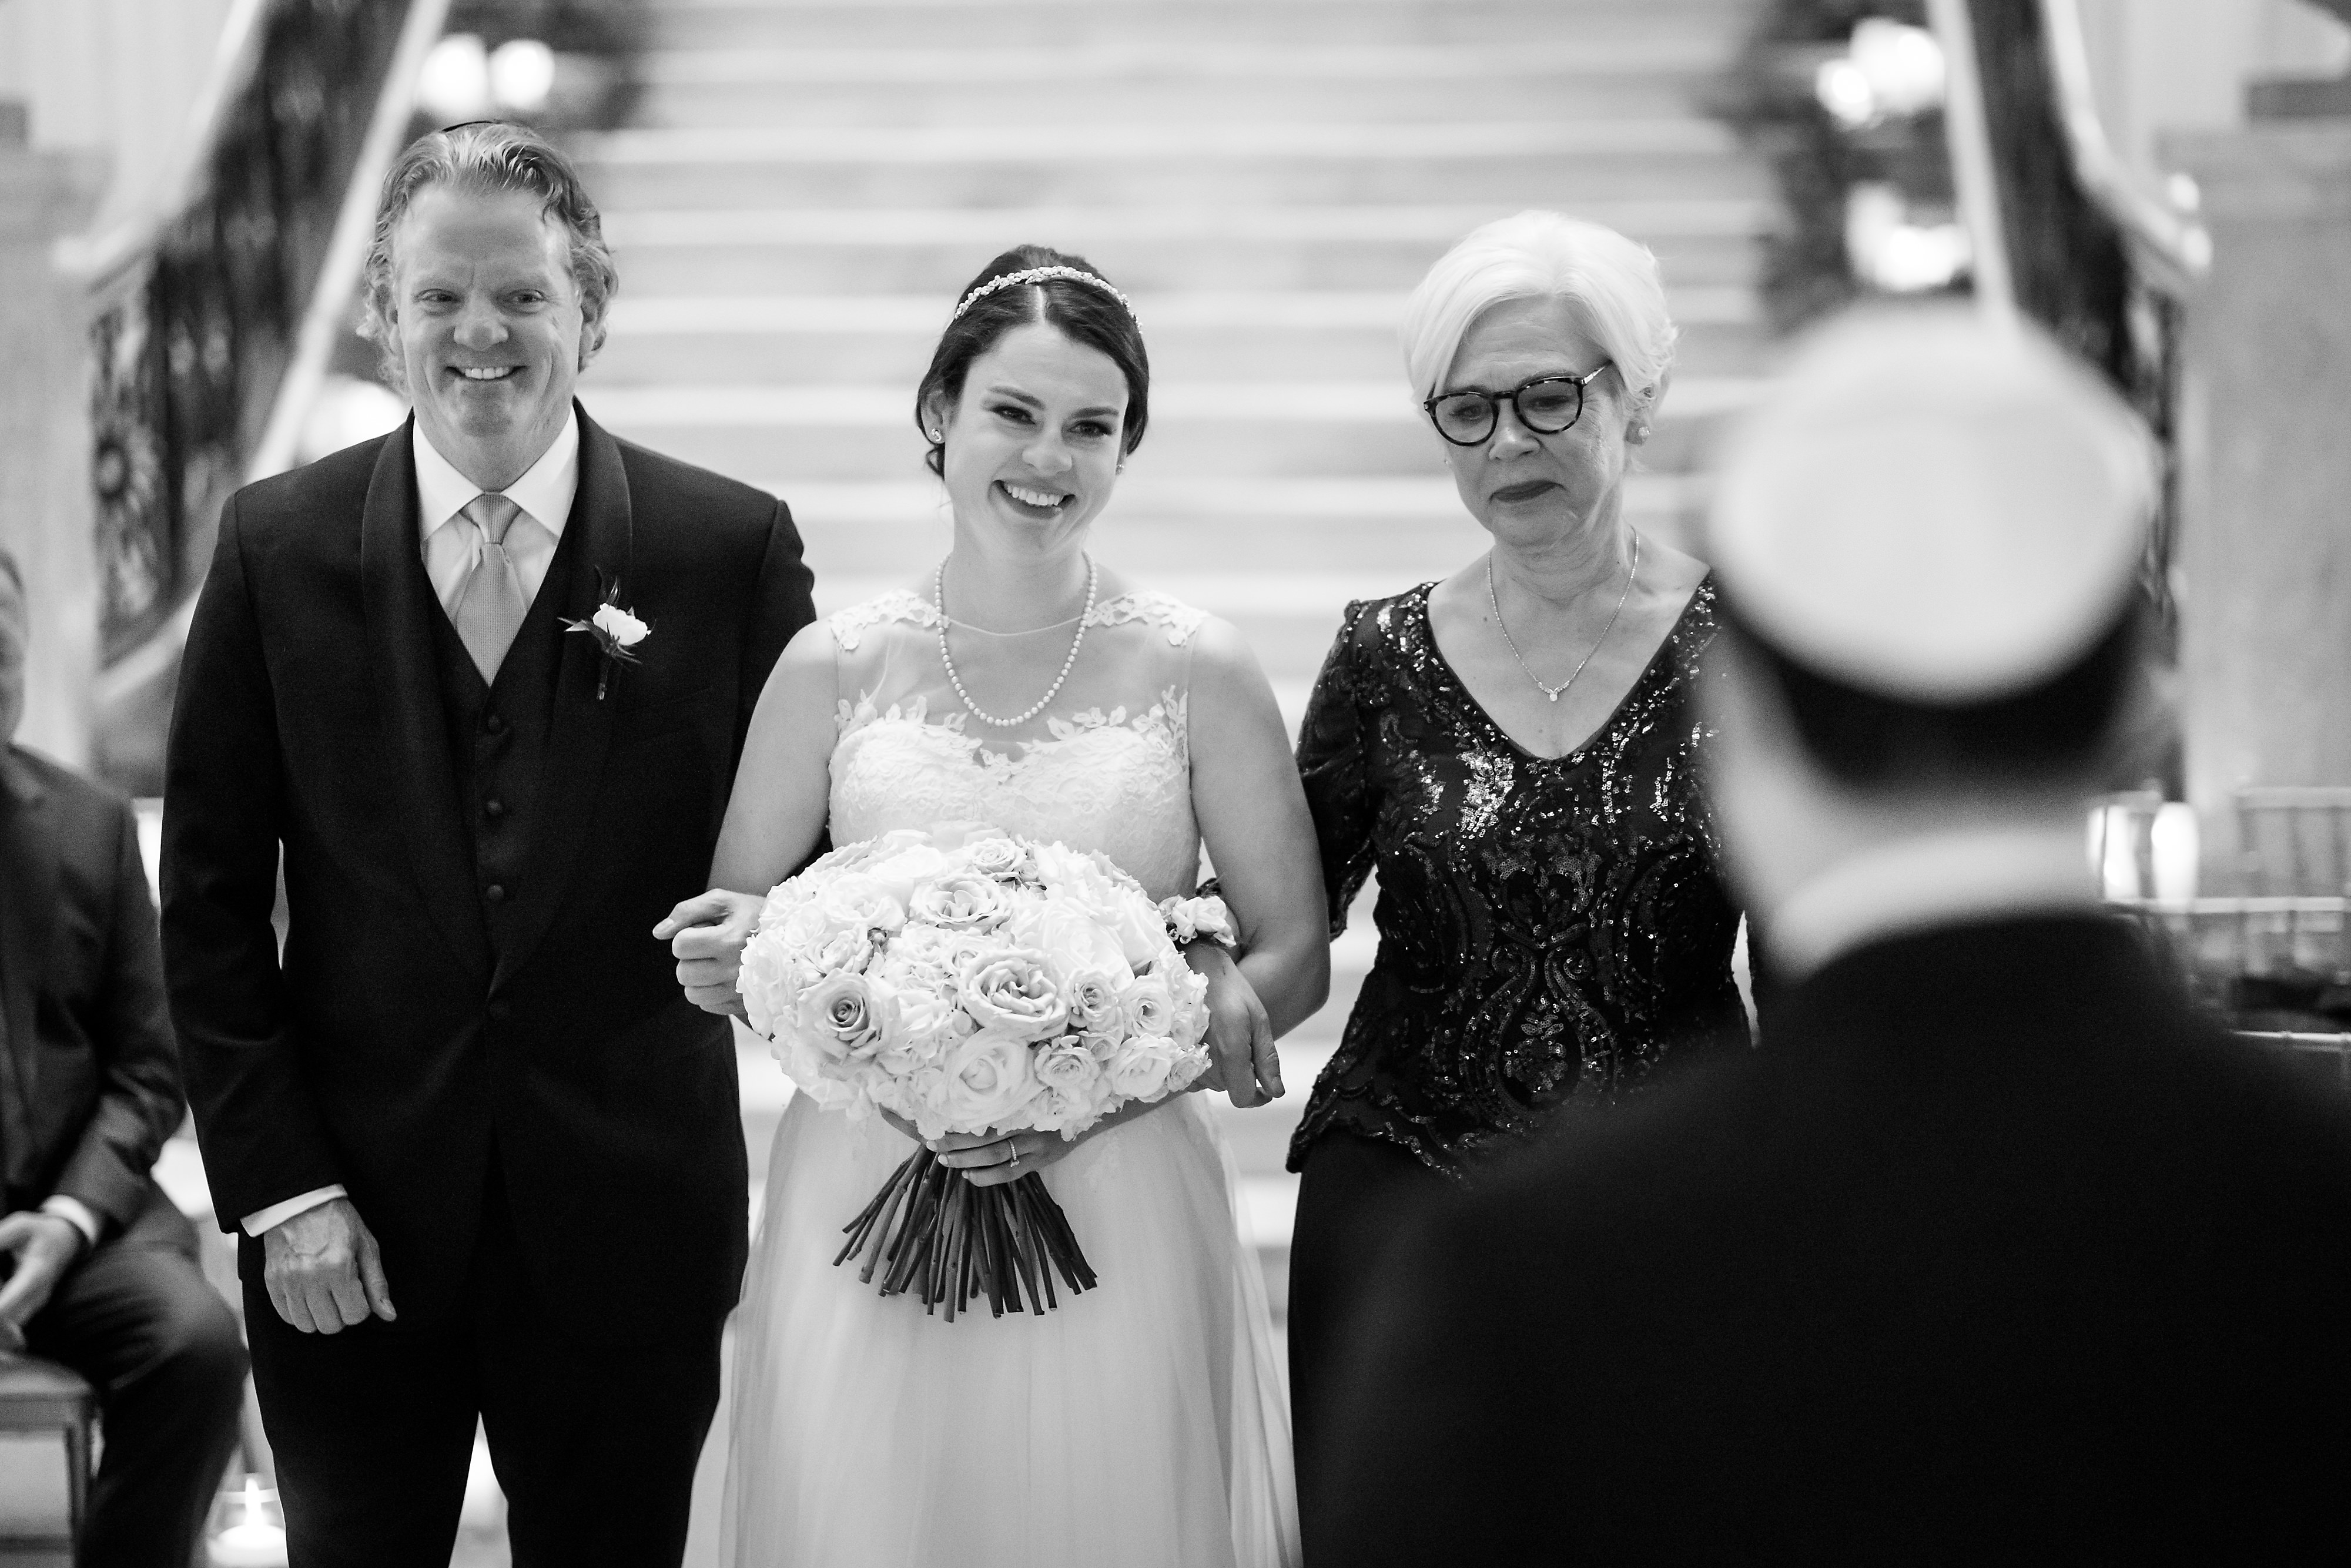 Bride walks in with parents during wedding ceremony at the Rookery Building in Chicago